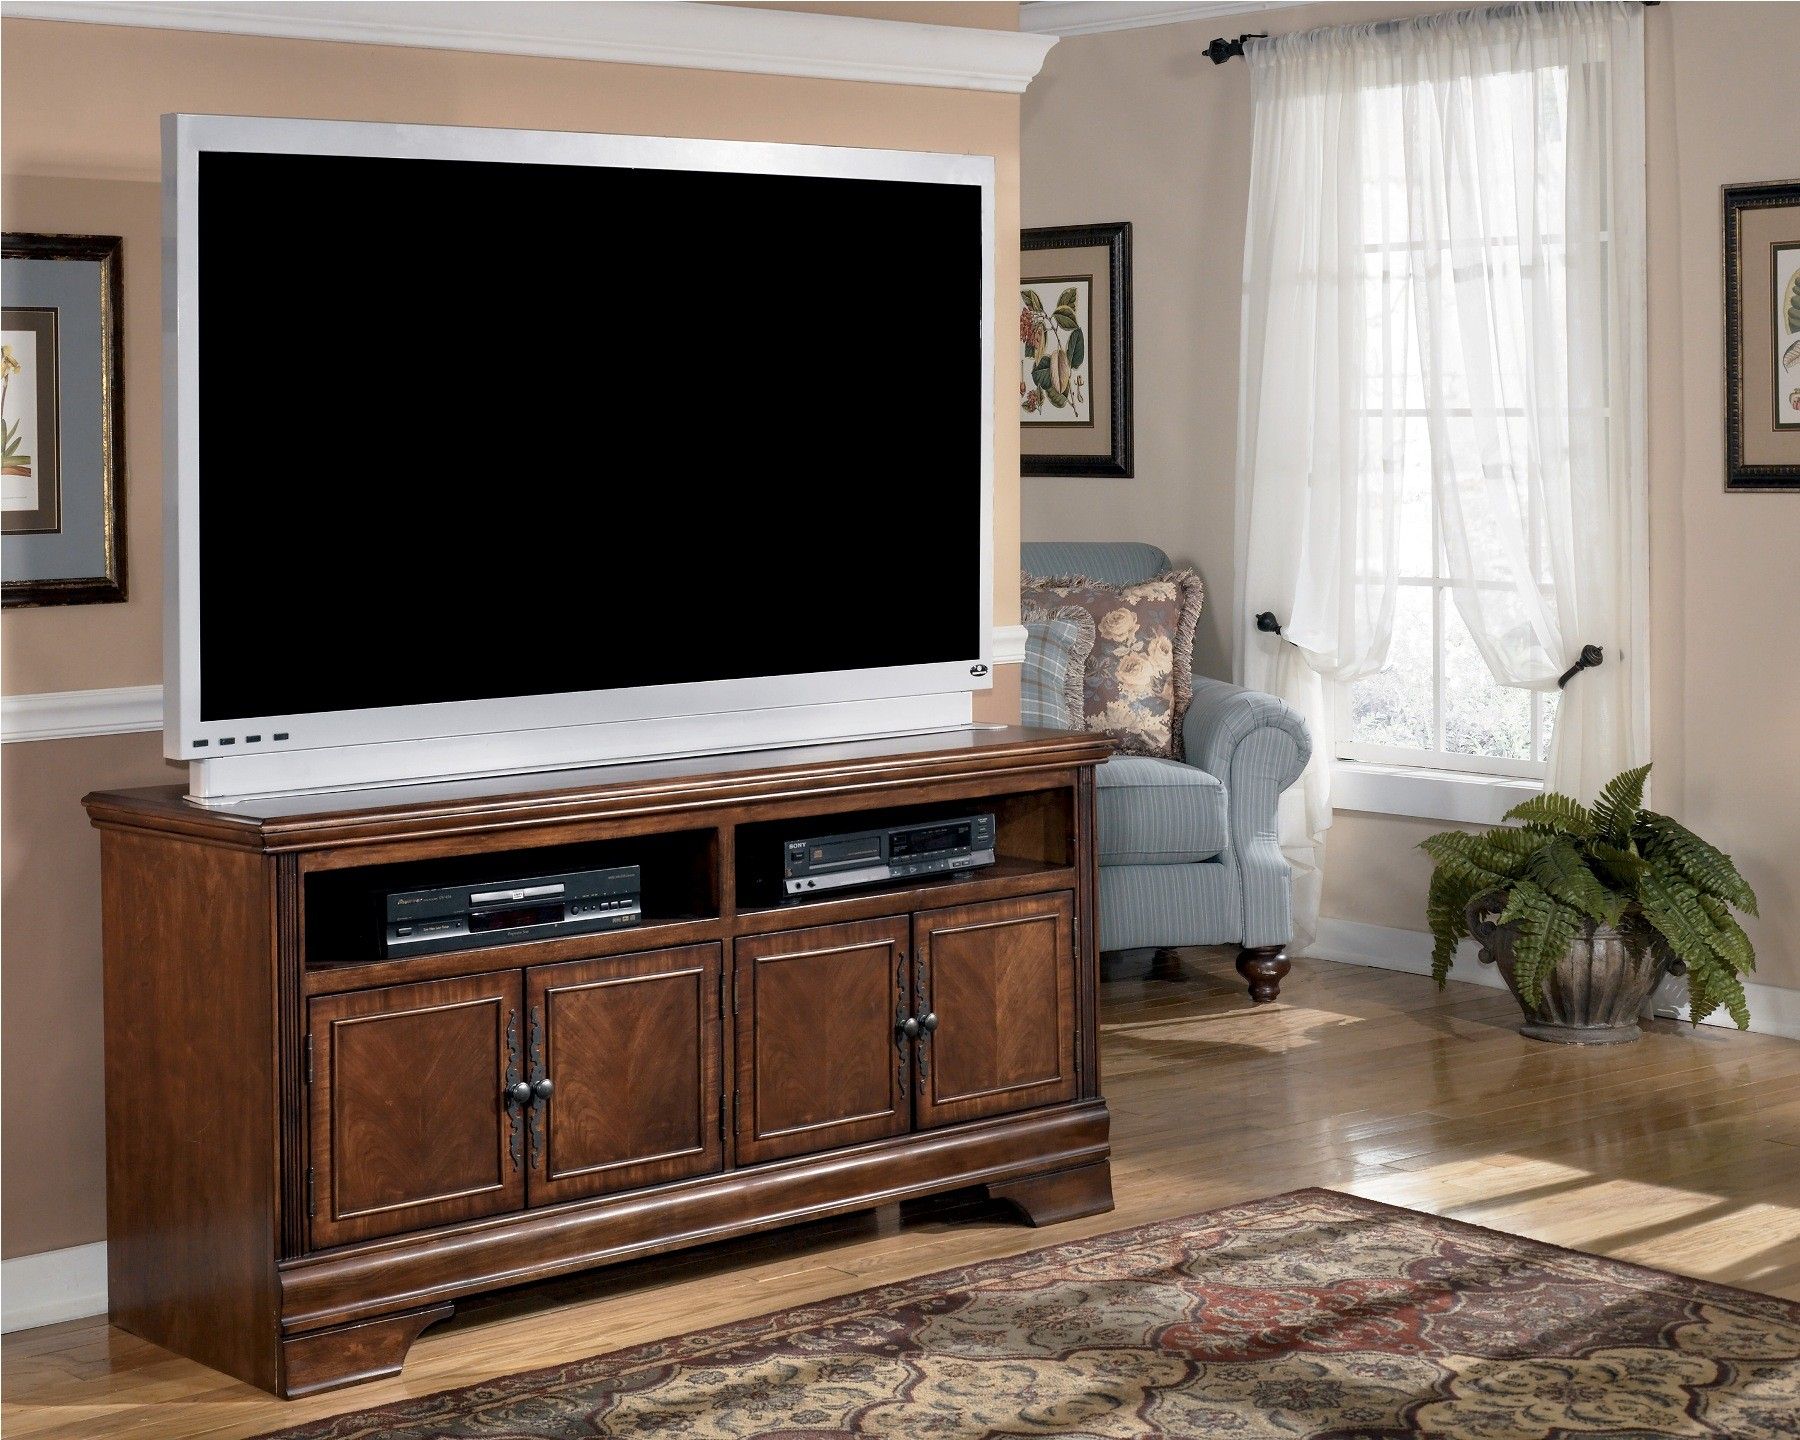 Hamlyn 60 Inch Tv Stand From Ashley (w527 38) | Coleman With Adayah Tv Stands For Tvs Up To 60" (View 9 of 15)